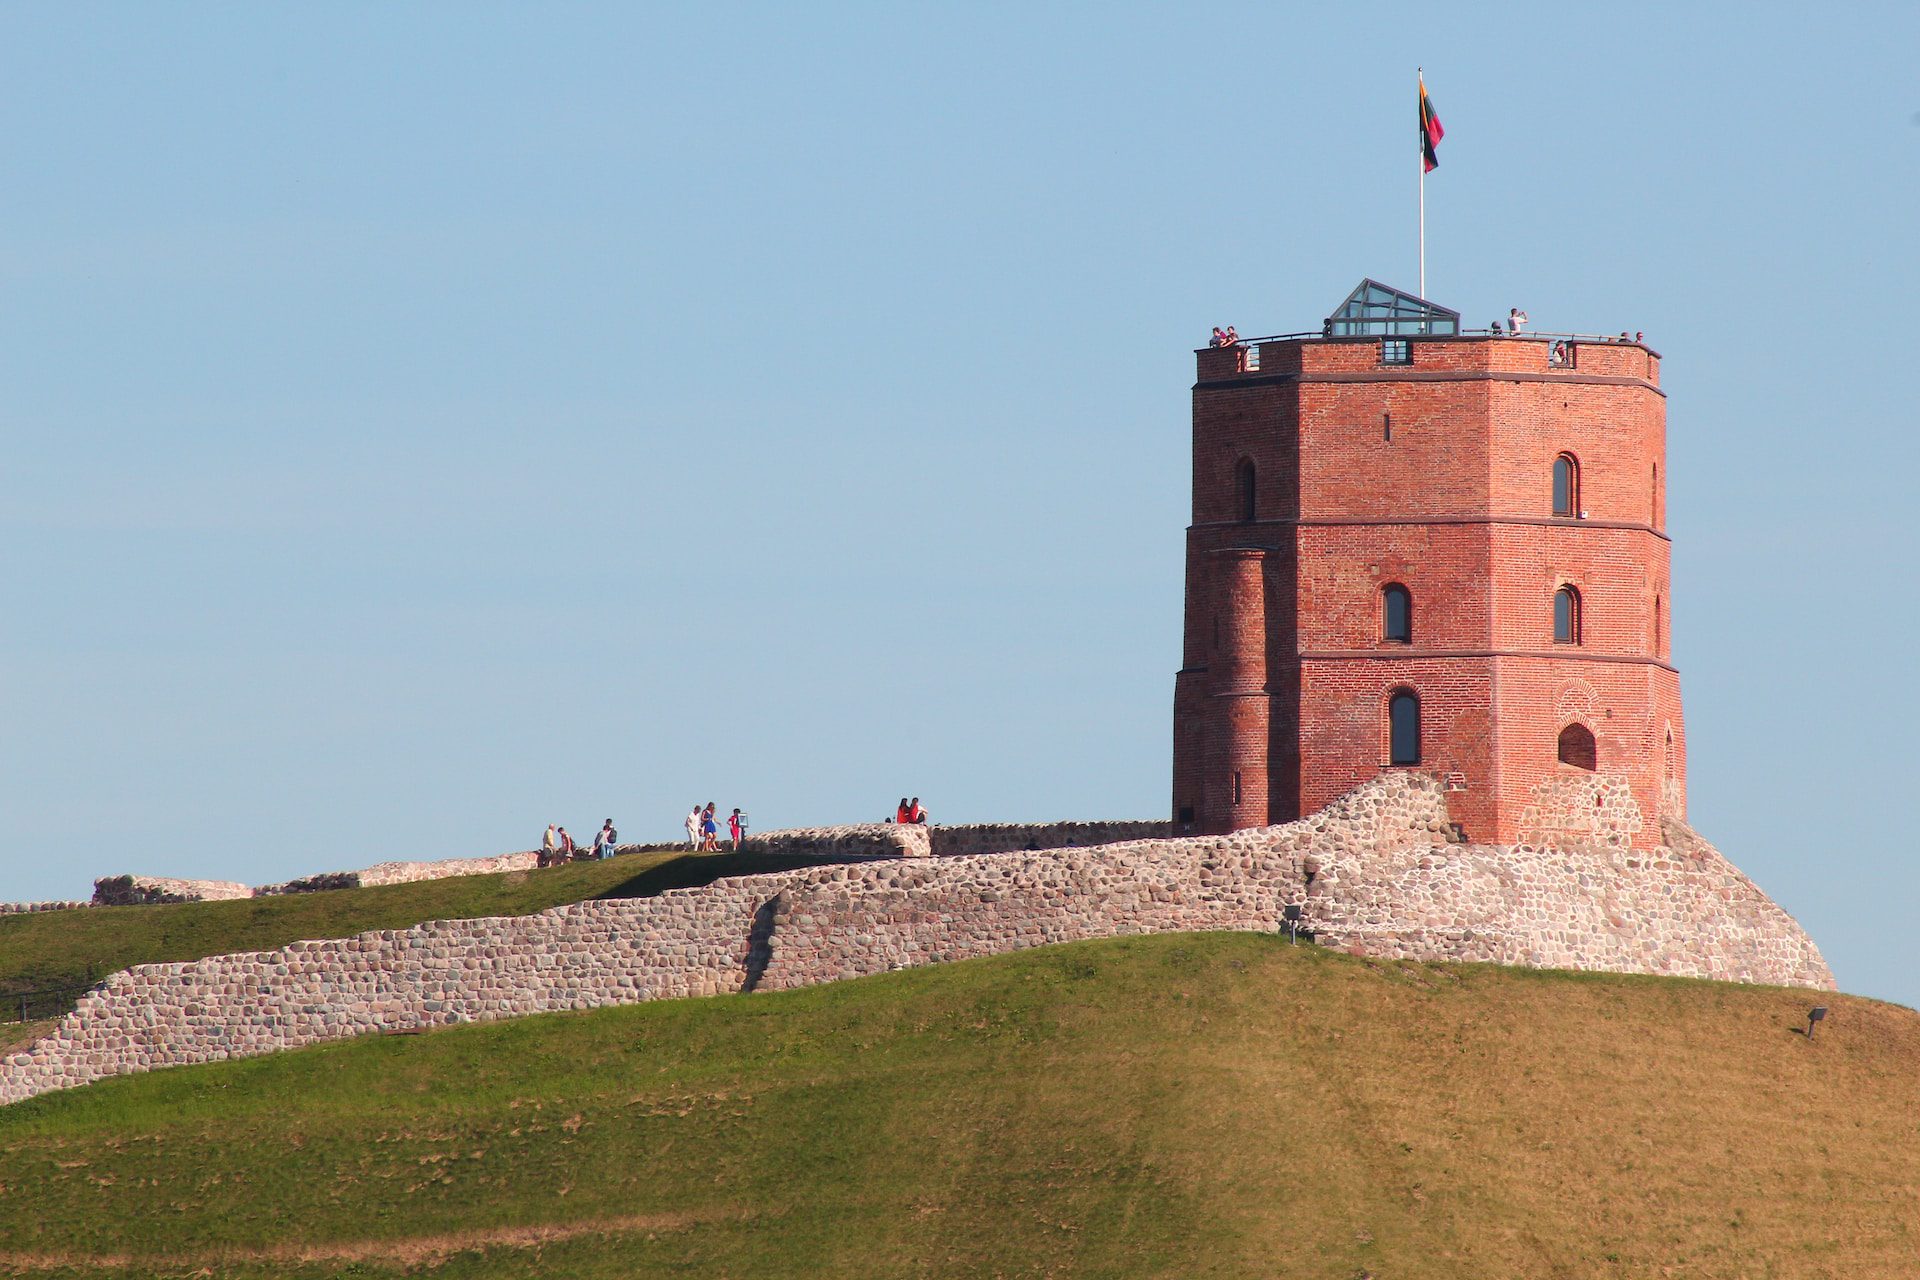 A red-brick tower standing atop a grassy hill with old castle walls around it and blue skies above.